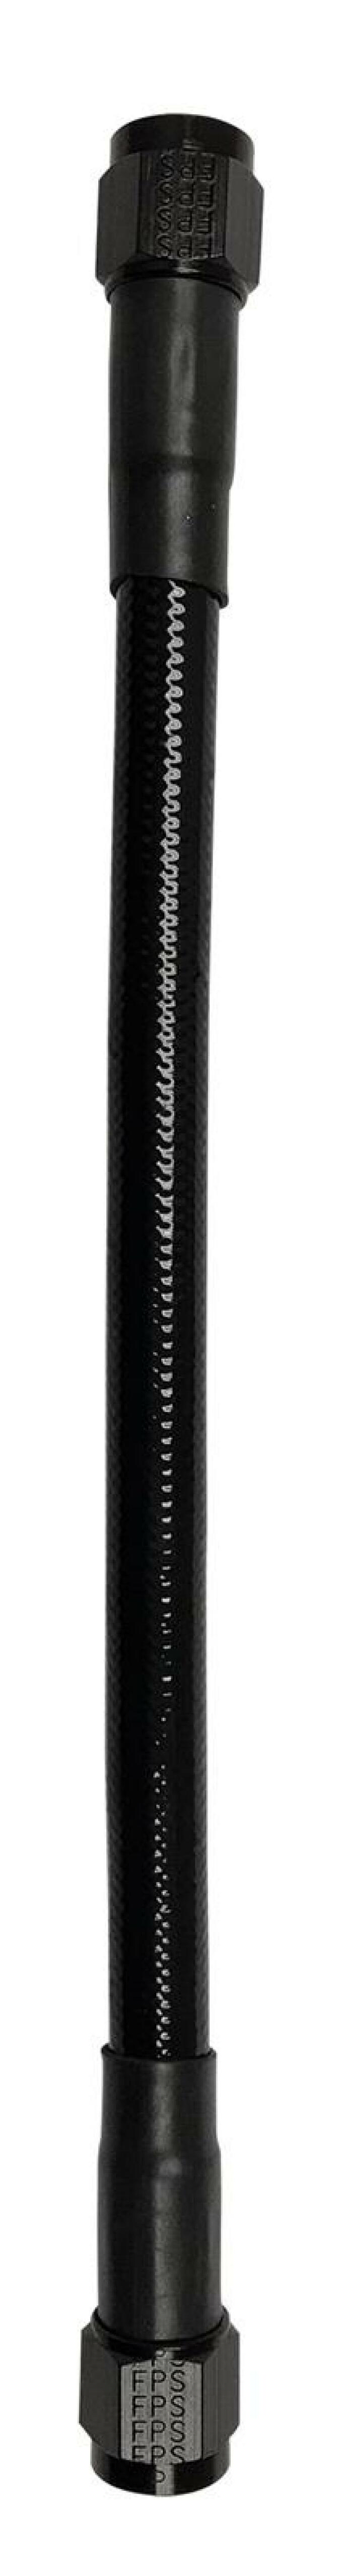 Fragola -8AN Ext Black PTFE Hose Assembly Straight x Straight 84in - 6028-1-1-84BL